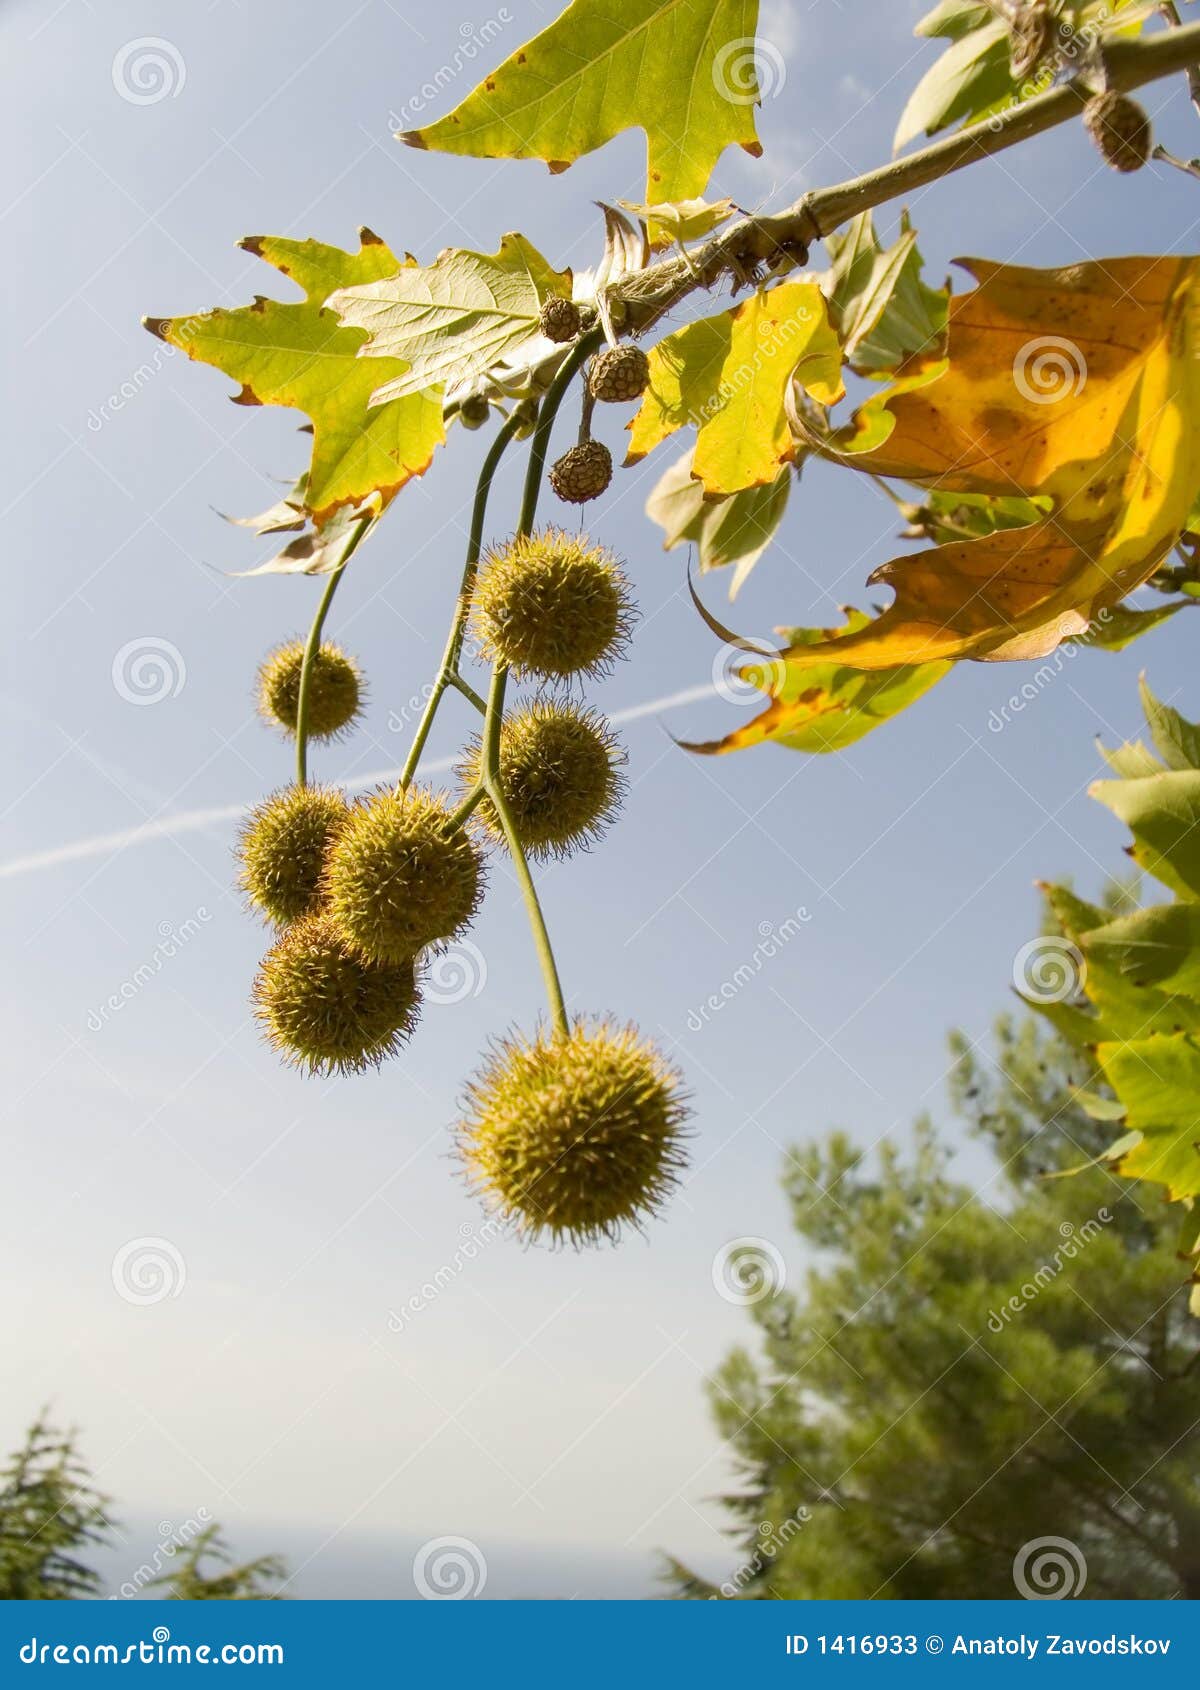 freakish prickly round fruits